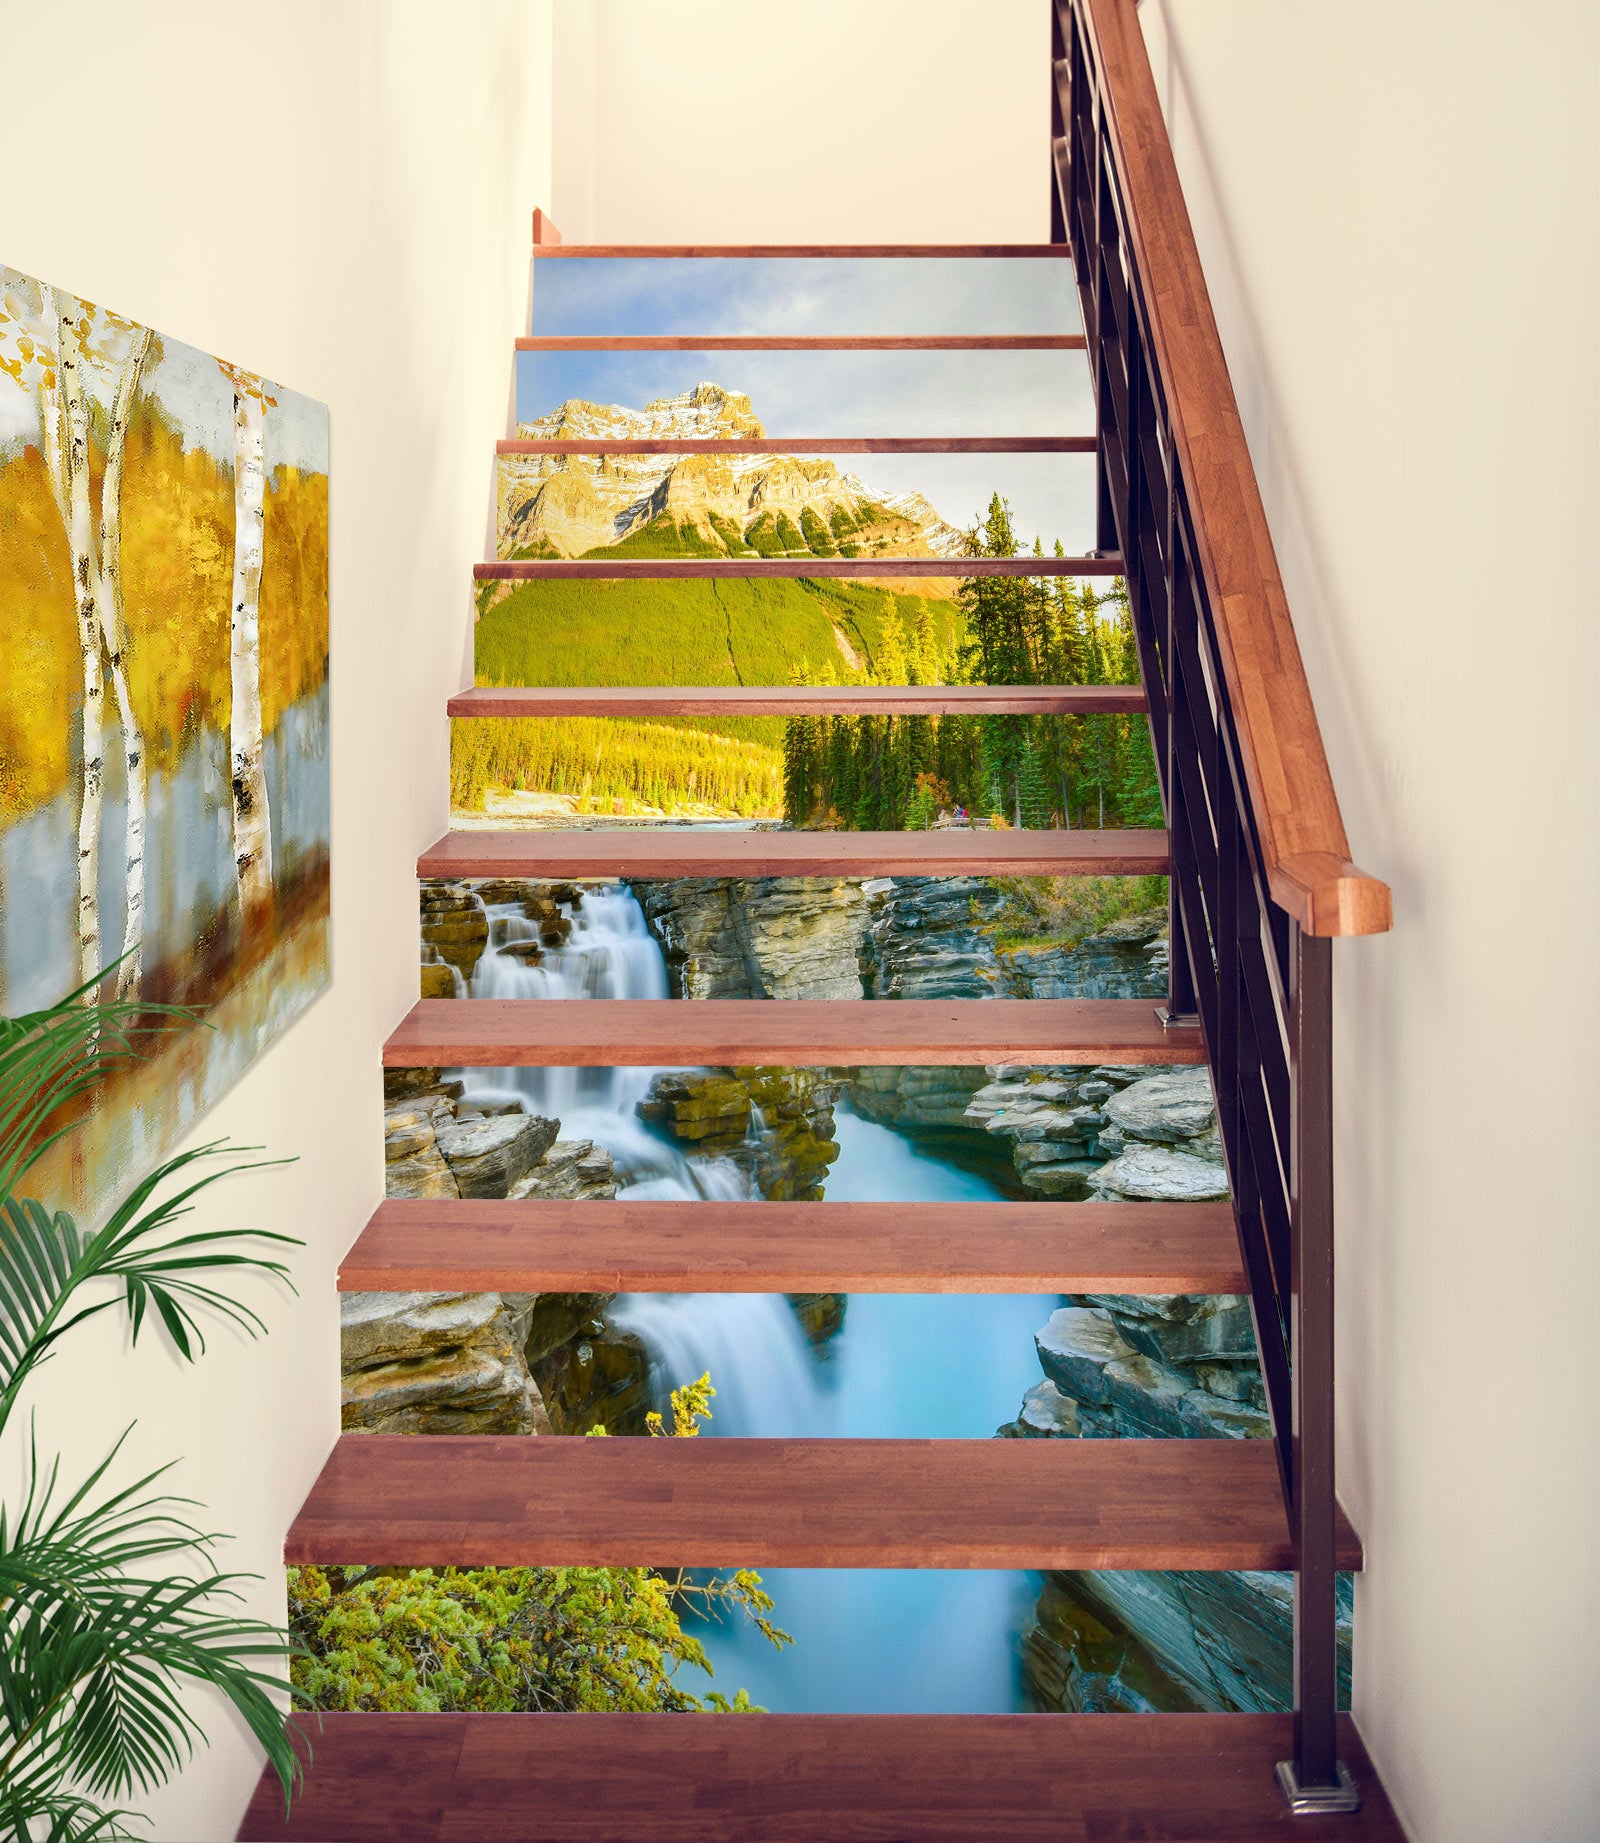 3D Charming Mountain Scenery 344 Stair Risers